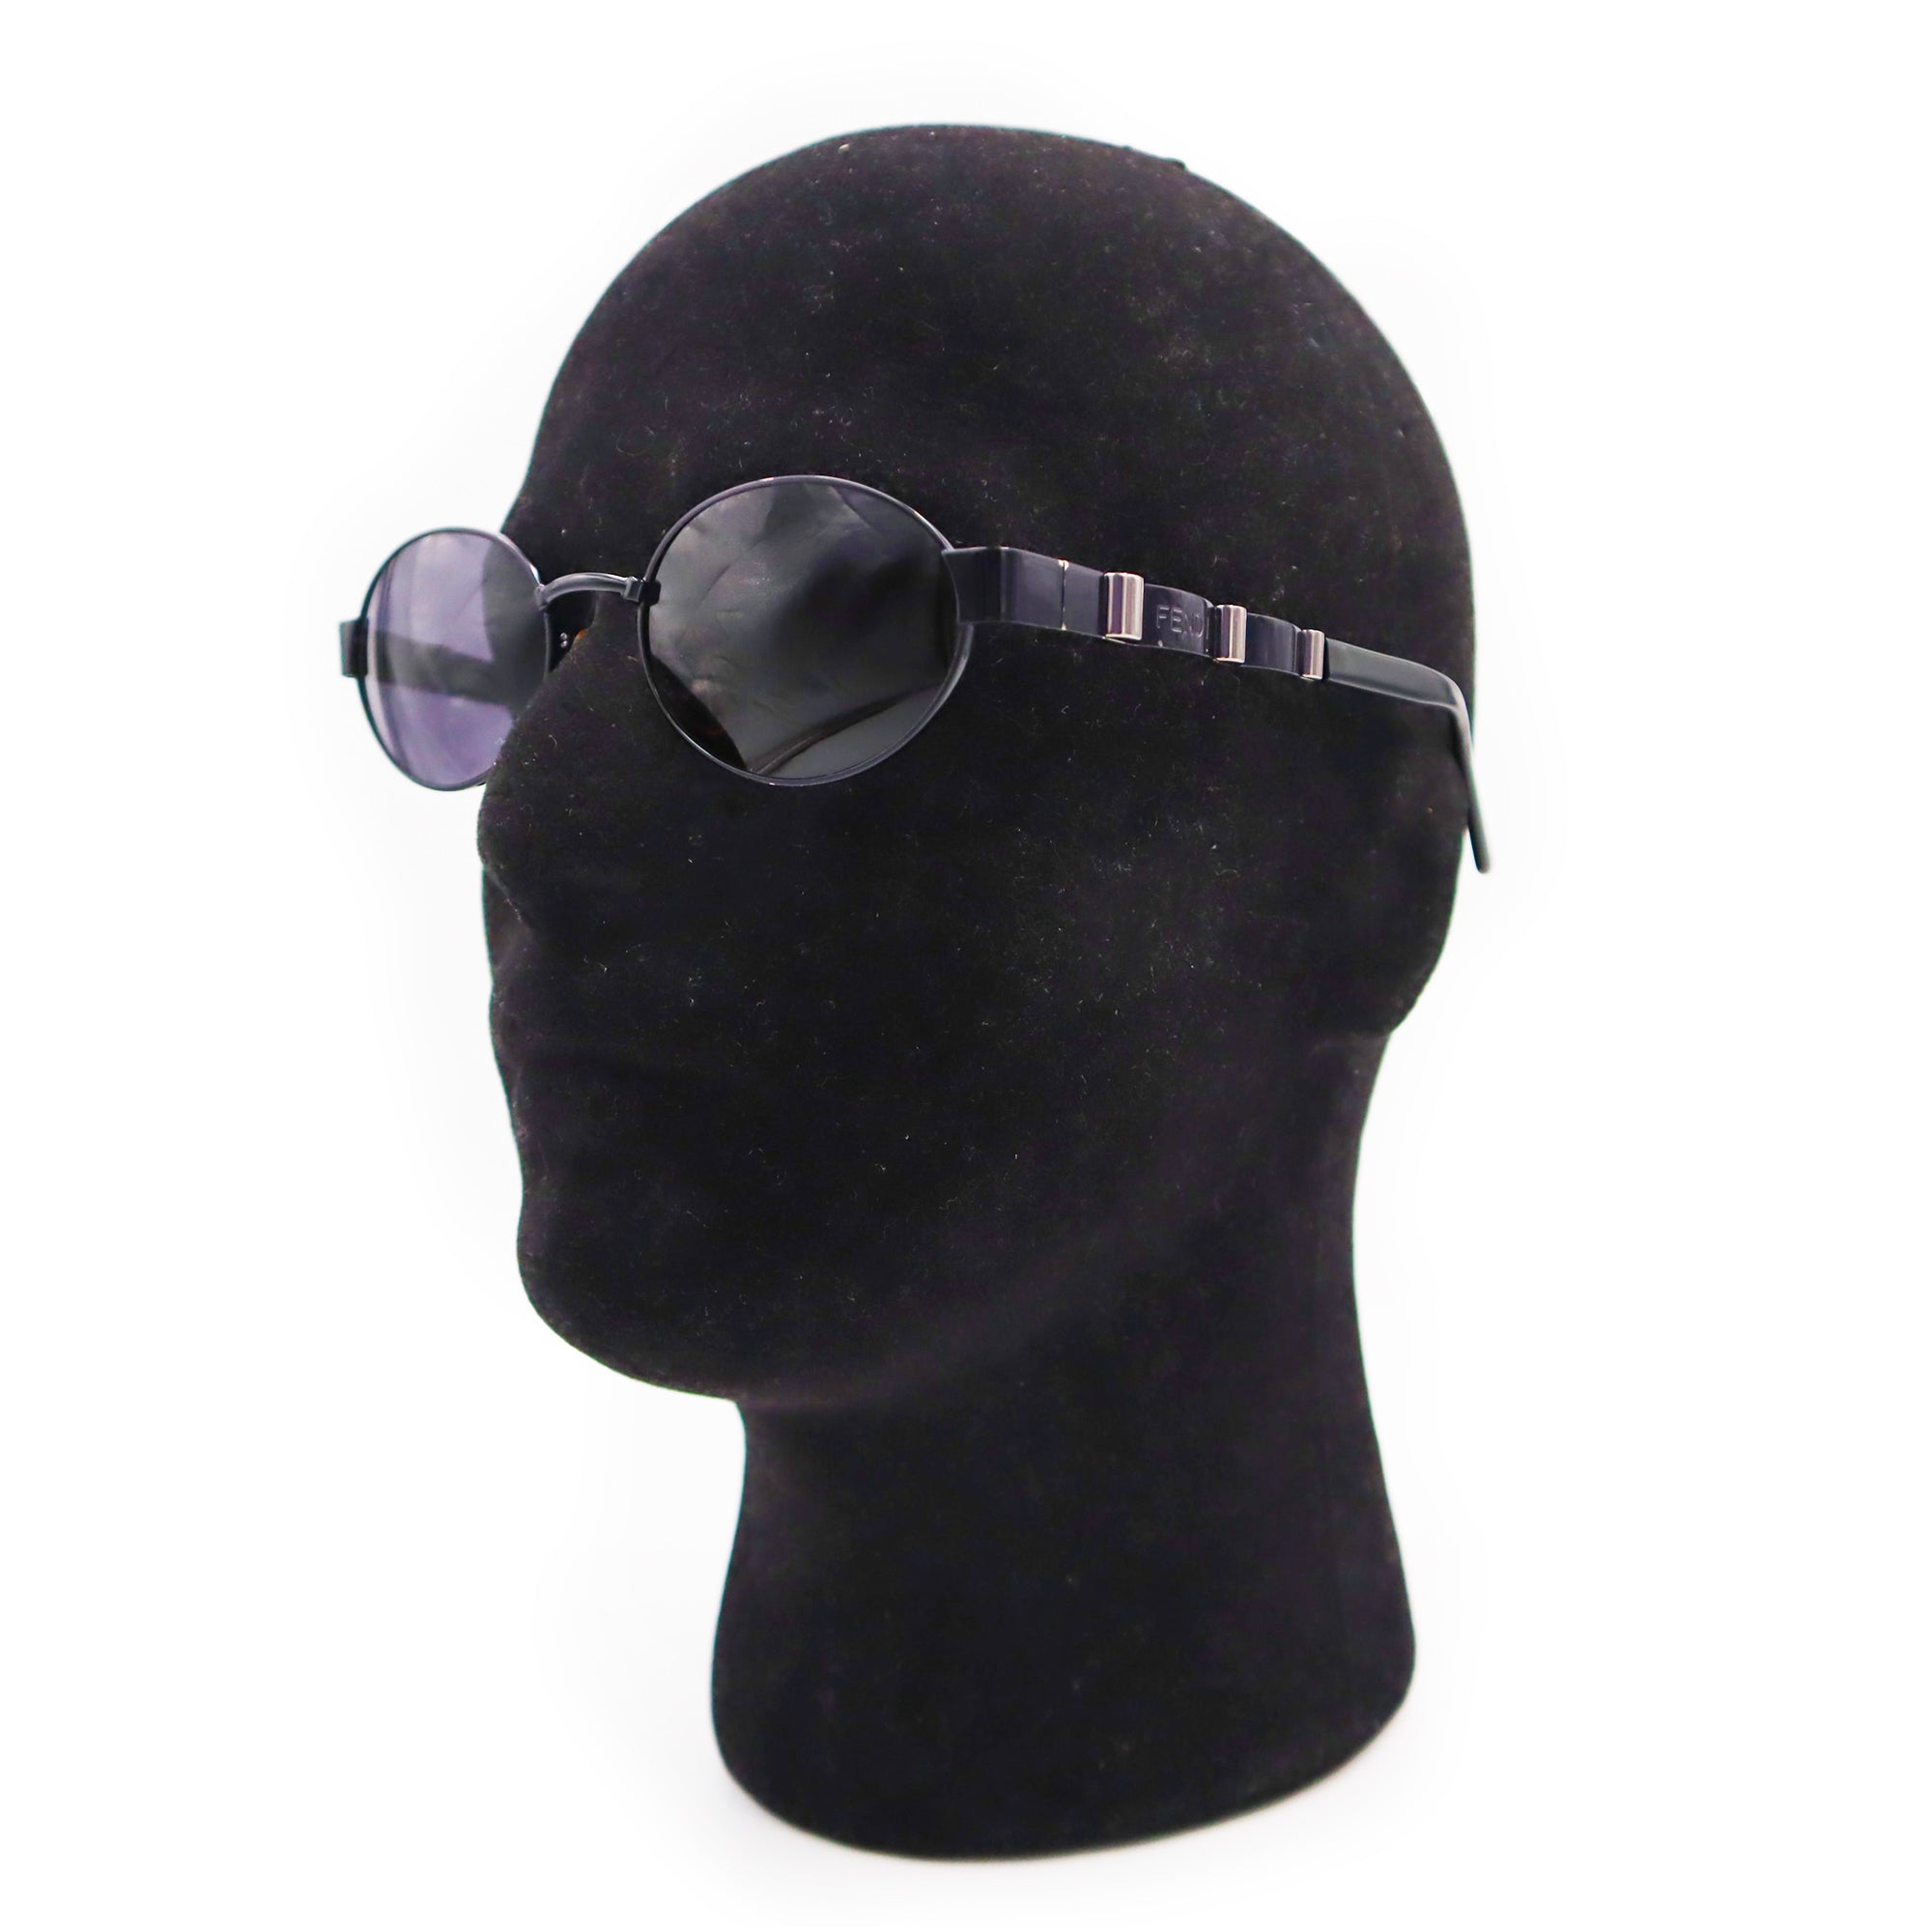 DEAL OF THE DAY Vintage Fendi Sunglasses